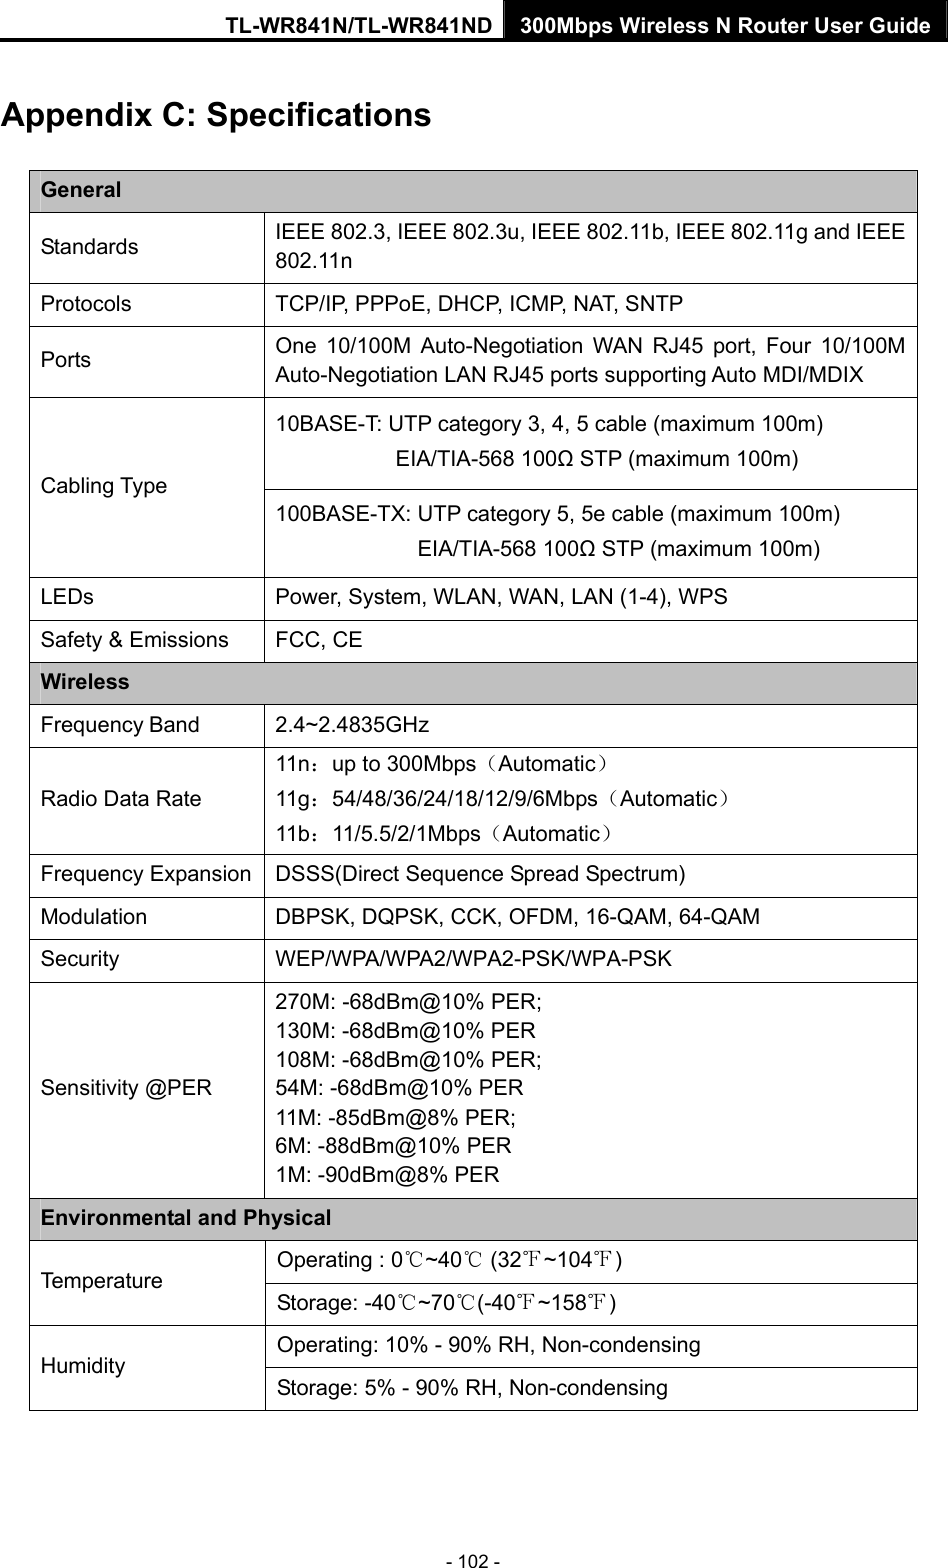 TL-WR841N/TL-WR841ND 300Mbps Wireless N Router User Guide - 102 - Appendix C: Specifications General Standards  IEEE 802.3, IEEE 802.3u, IEEE 802.11b, IEEE 802.11g and IEEE 802.11n Protocols  TCP/IP, PPPoE, DHCP, ICMP, NAT, SNTP Ports  One 10/100M Auto-Negotiation WAN RJ45 port, Four 10/100M Auto-Negotiation LAN RJ45 ports supporting Auto MDI/MDIX 10BASE-T: UTP category 3, 4, 5 cable (maximum 100m) EIA/TIA-568 100Ω STP (maximum 100m) Cabling Type 100BASE-TX: UTP category 5, 5e cable (maximum 100m) EIA/TIA-568 100Ω STP (maximum 100m) LEDs  Power, System, WLAN, WAN, LAN (1-4), WPS Safety &amp; Emissions  FCC, CE Wireless Frequency Band 2.4~2.4835GHz Radio Data Rate 11n：up to 300Mbps（Automatic） 11g：54/48/36/24/18/12/9/6Mbps（Automatic） 11b：11/5.5/2/1Mbps（Automatic） Frequency Expansion  DSSS(Direct Sequence Spread Spectrum) Modulation  DBPSK, DQPSK, CCK, OFDM, 16-QAM, 64-QAM Security WEP/WPA/WPA2/WPA2-PSK/WPA-PSK Sensitivity @PER 270M: -68dBm@10% PER; 130M: -68dBm@10% PER 108M: -68dBm@10% PER;   54M: -68dBm@10% PER 11M: -85dBm@8% PER;   6M: -88dBm@10% PER 1M: -90dBm@8% PER Environmental and Physical Operating : 0℃~40℃ (32 ~104℉℉) Temperature  Storage: -40℃~70℃(-40℉~158℉) Operating: 10% - 90% RH, Non-condensing Humidity  Storage: 5% - 90% RH, Non-condensing 